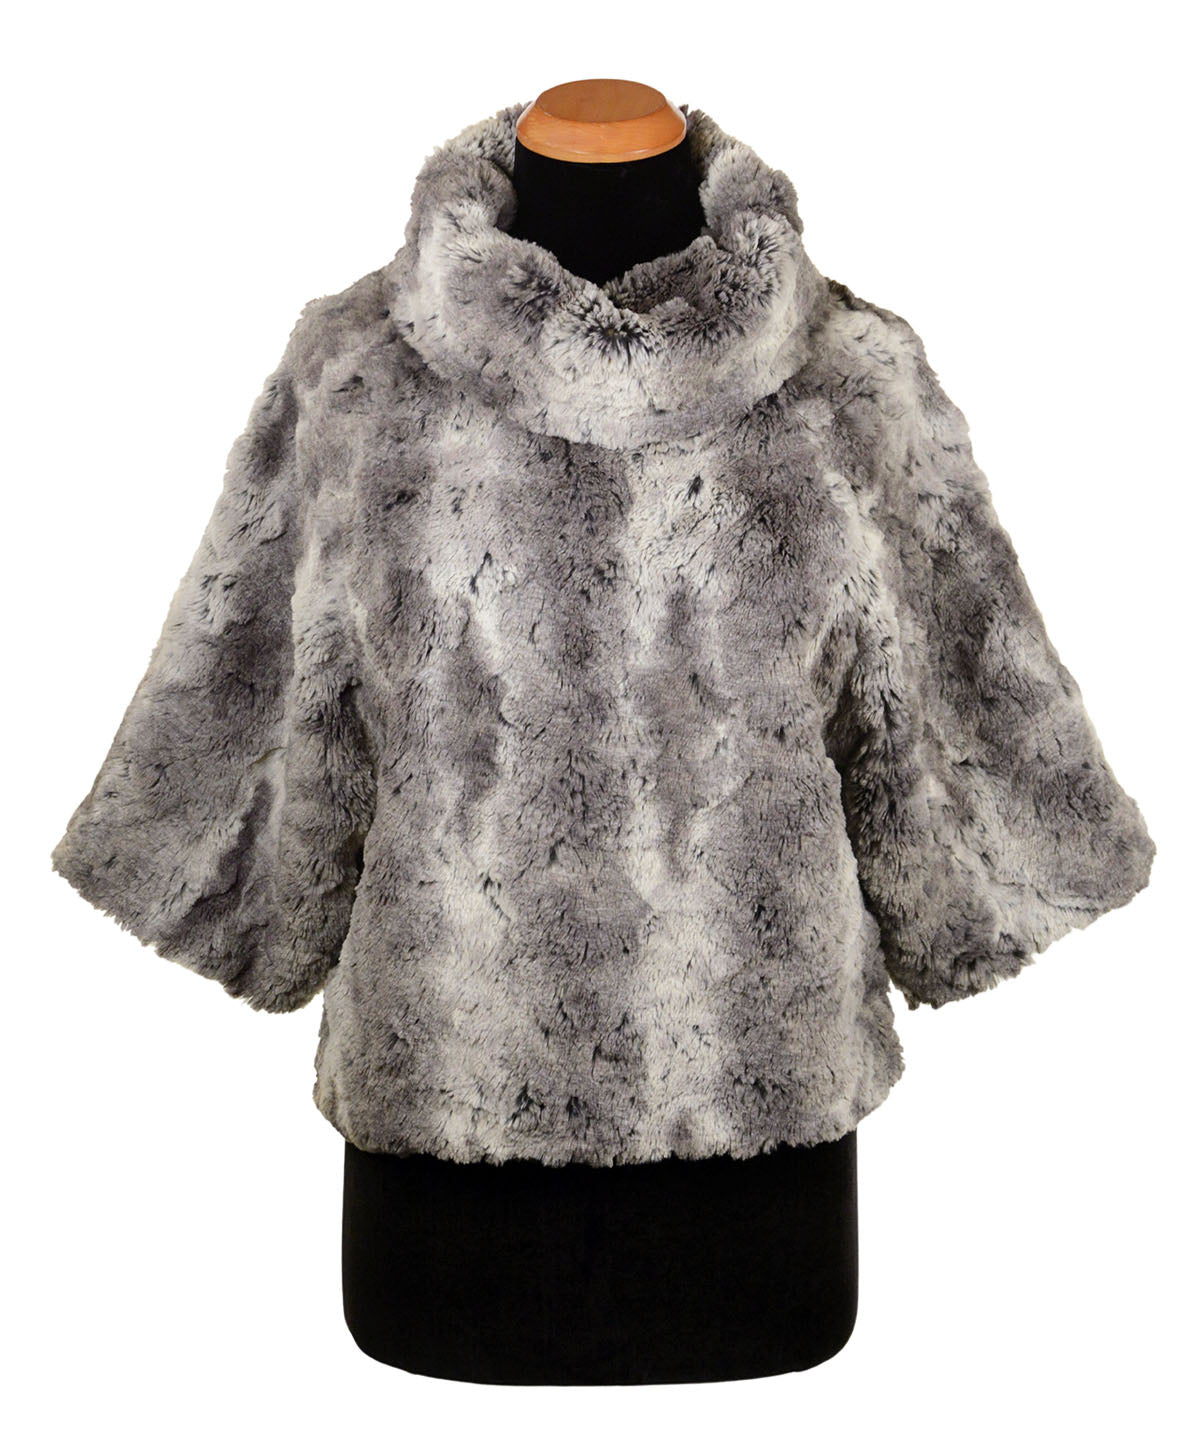 Sweater Top with Cowl Neck in Seattle Sky Faux Fur. Extended length of 4". Handmade in Seattle, WA, USA by Pandemonium Seattle.